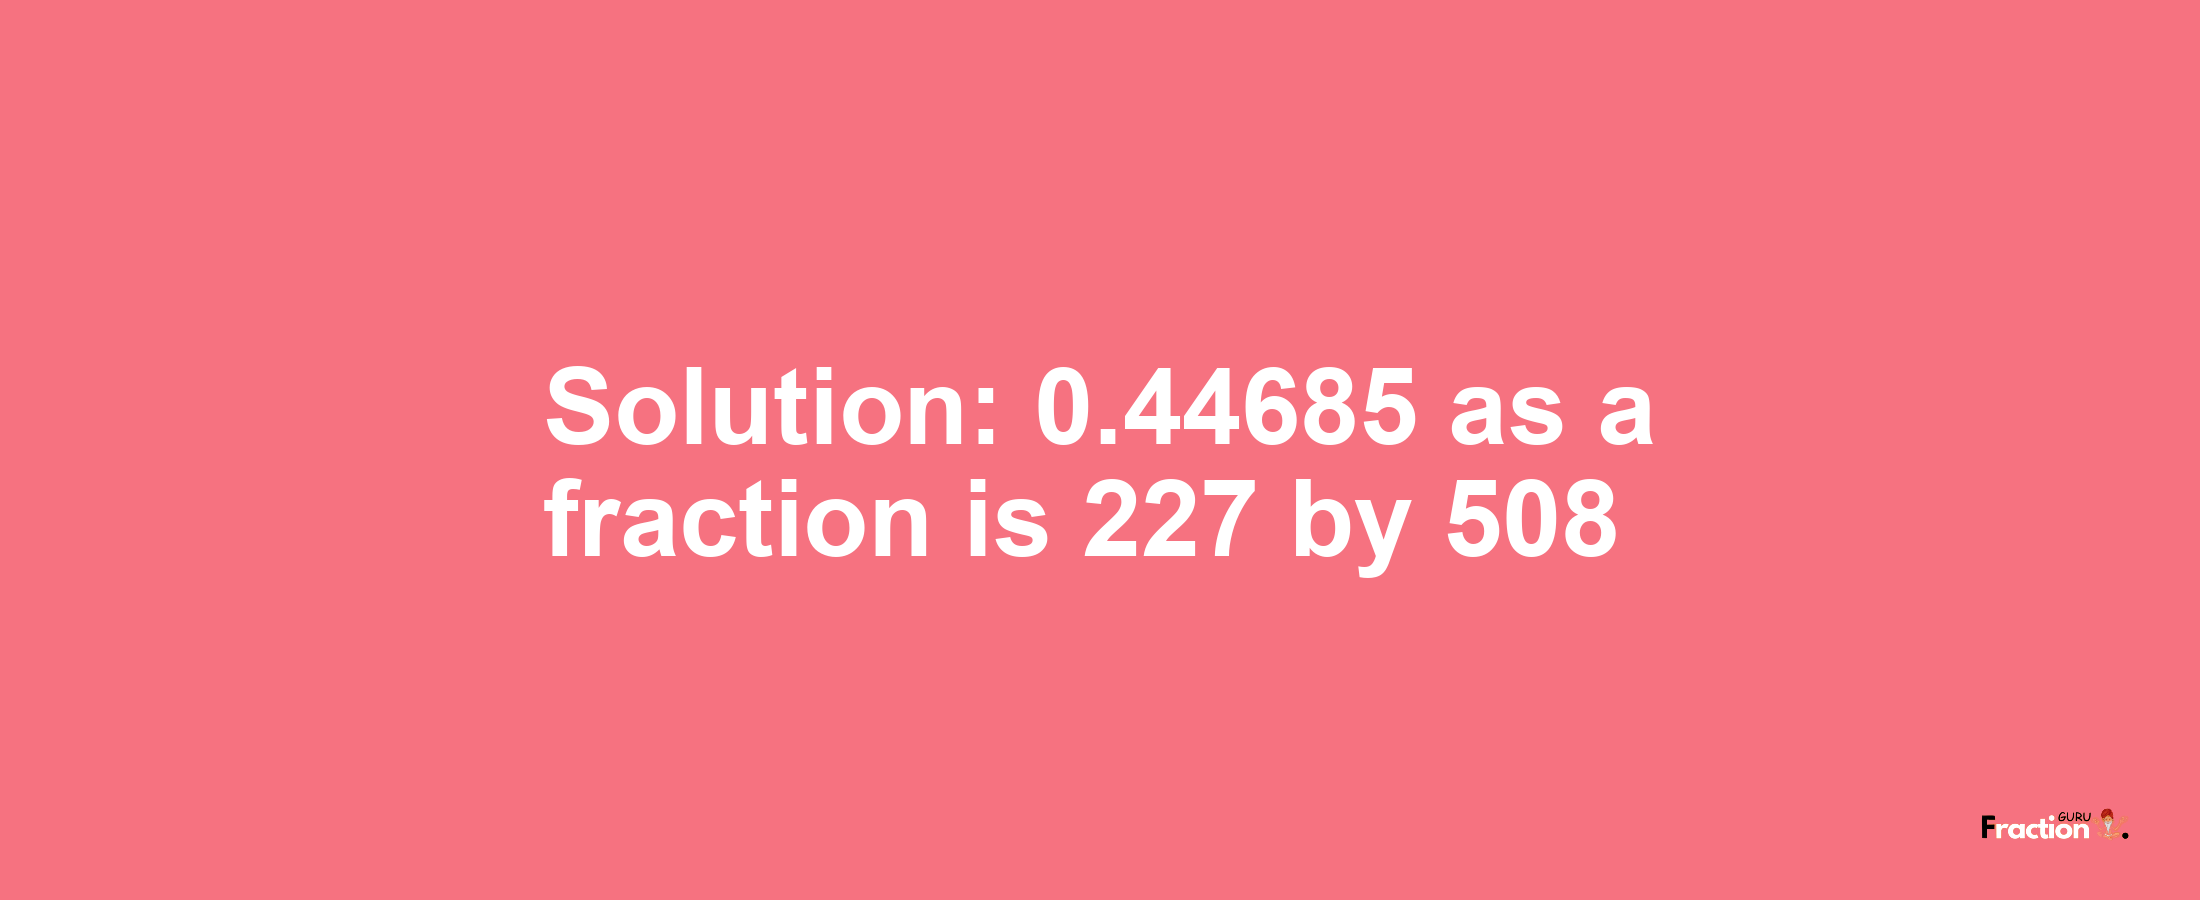 Solution:0.44685 as a fraction is 227/508